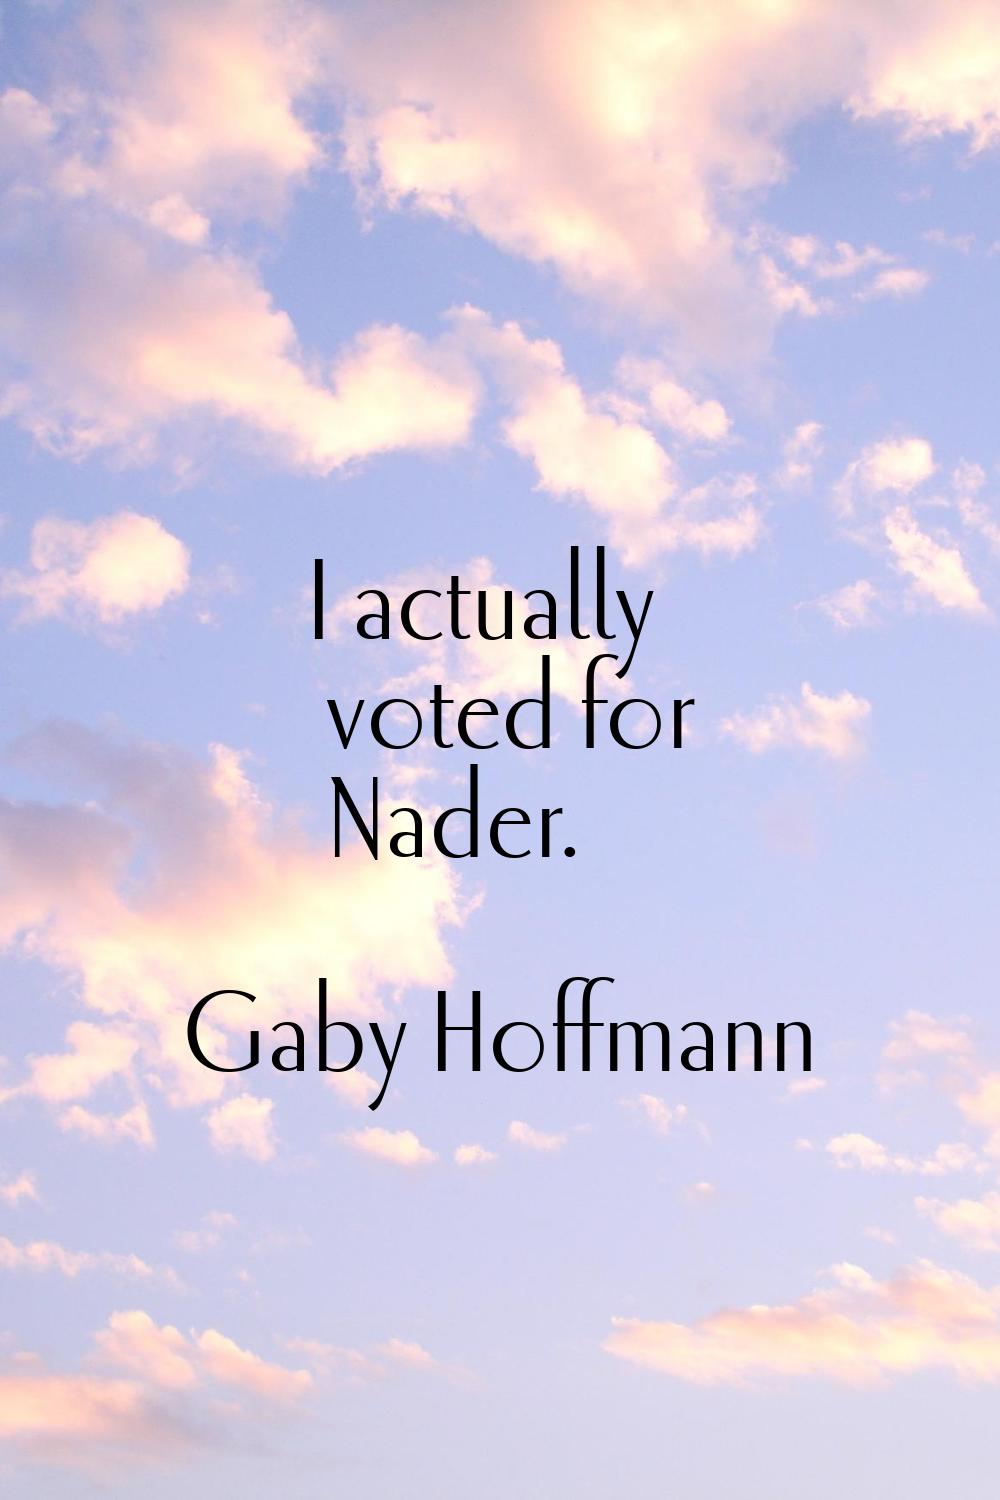 I actually voted for Nader.